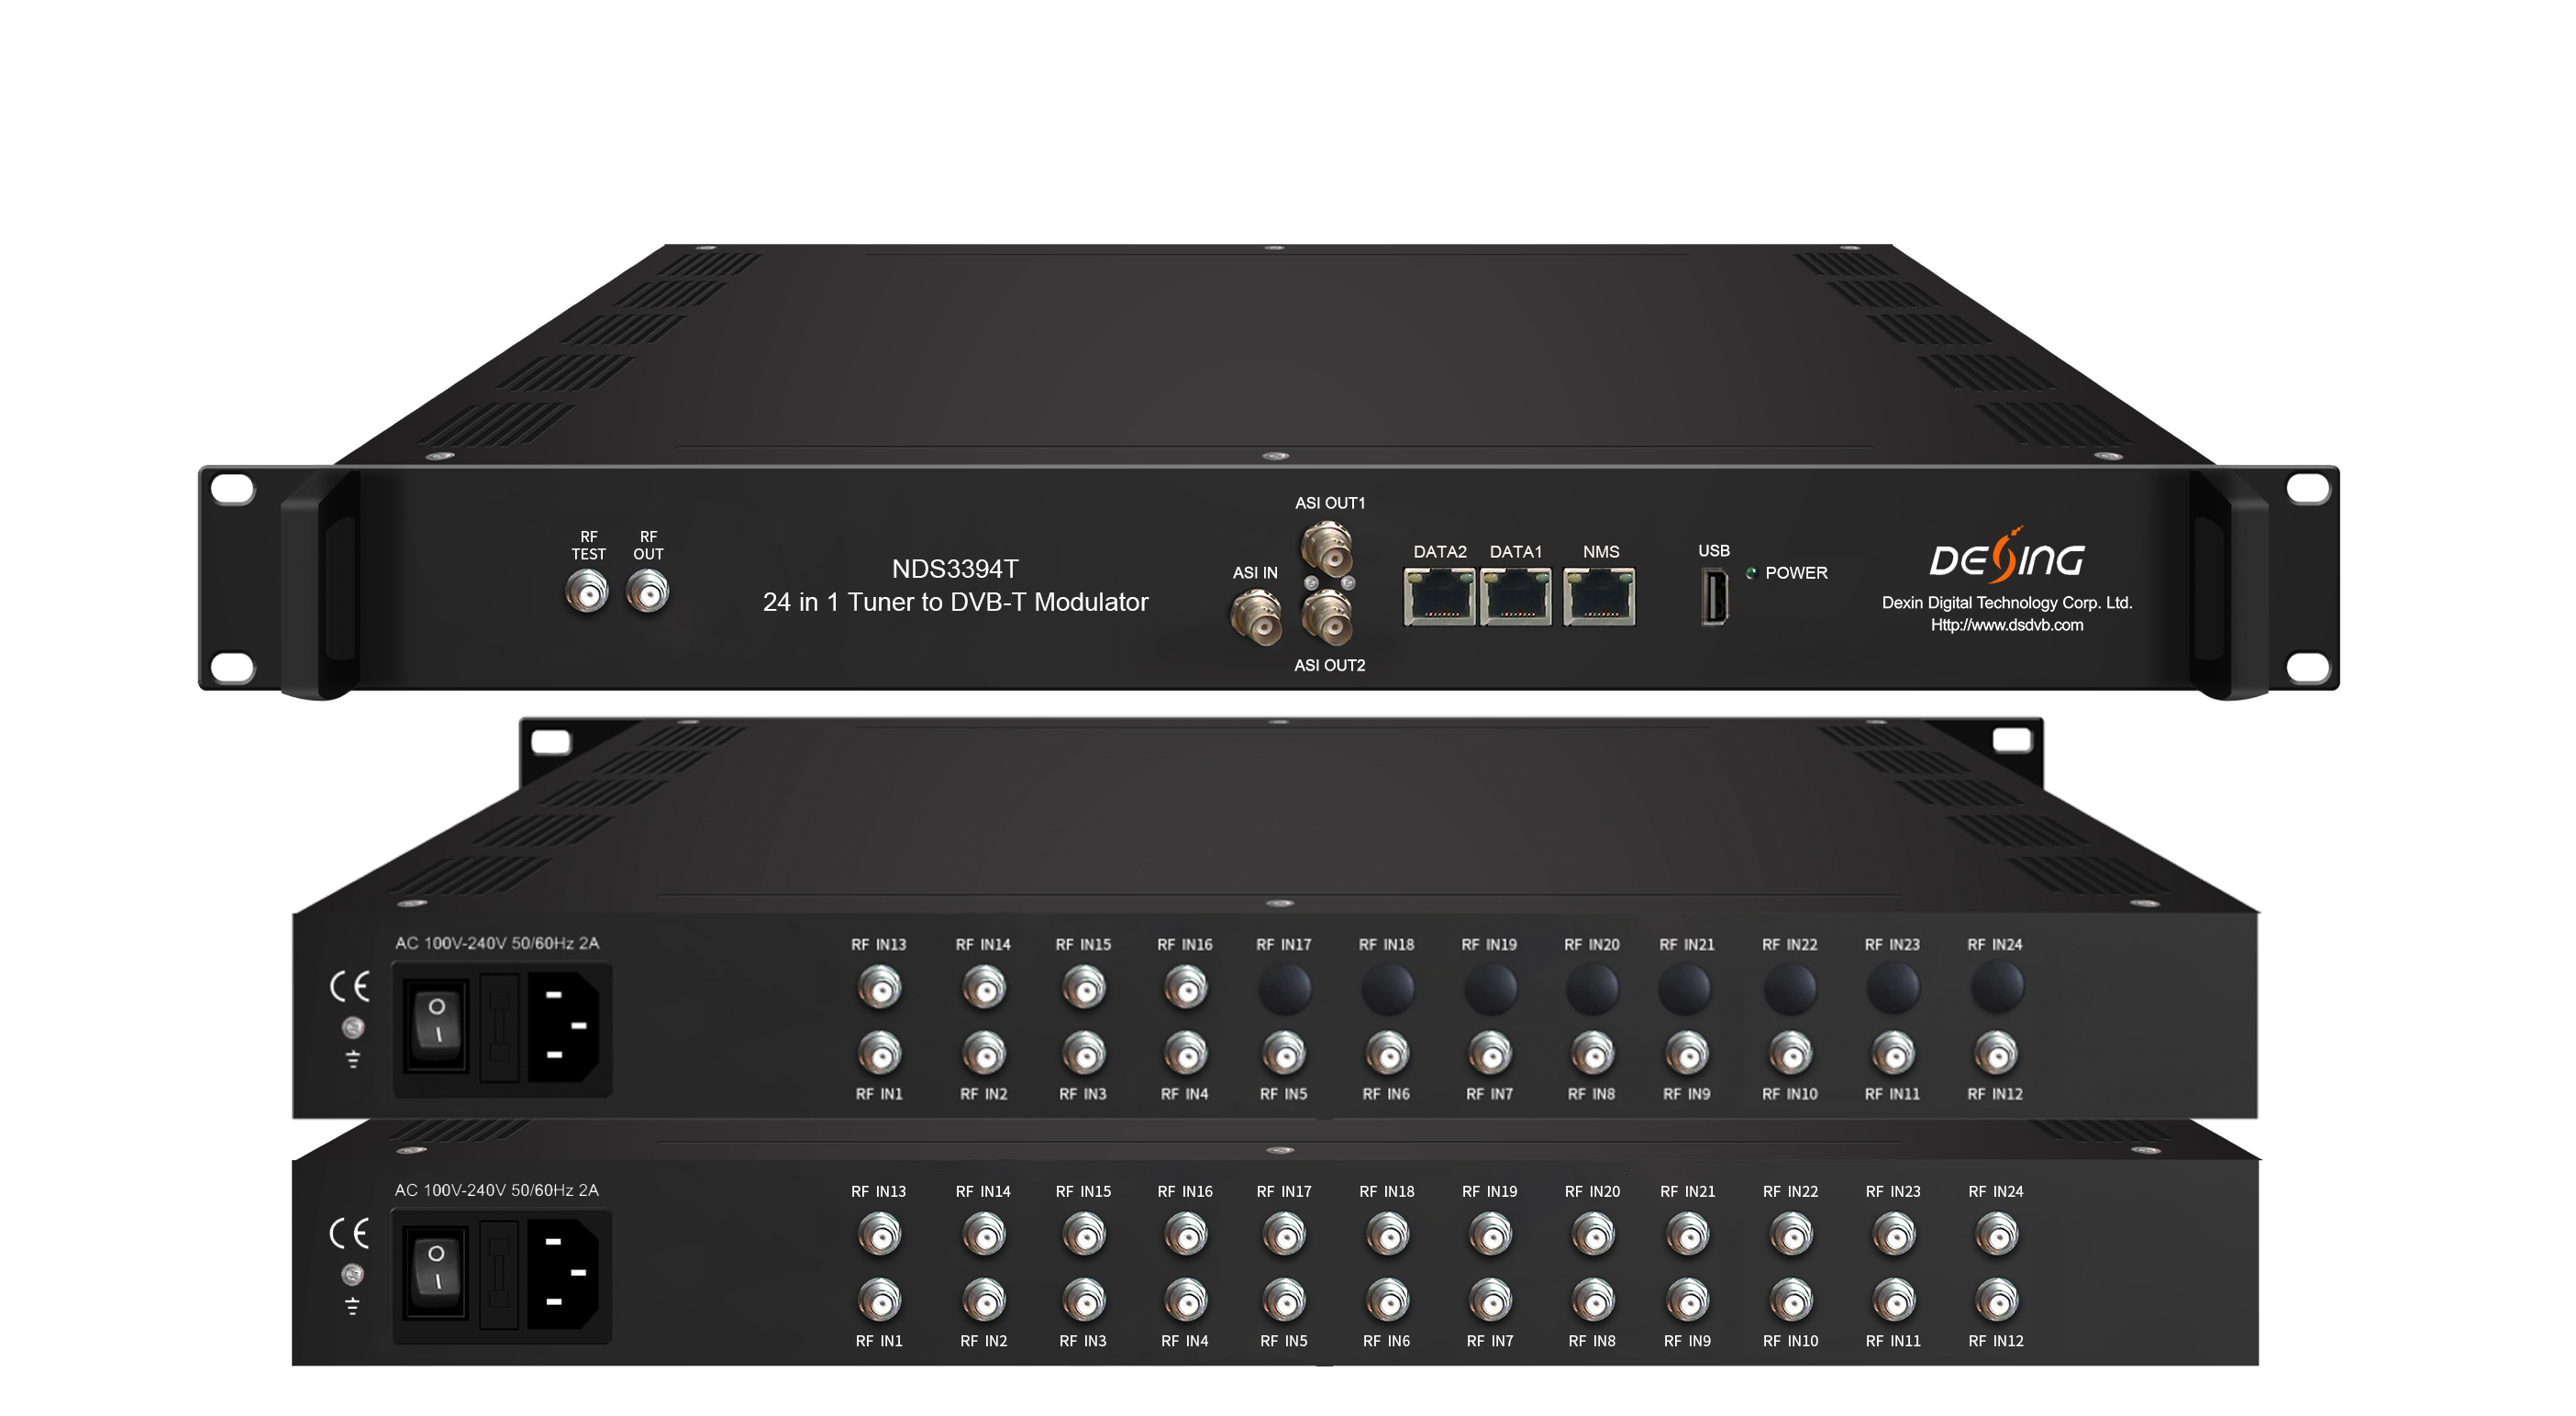 NDS3394T 16in1 24in1 Tuner to DVB-T modulator